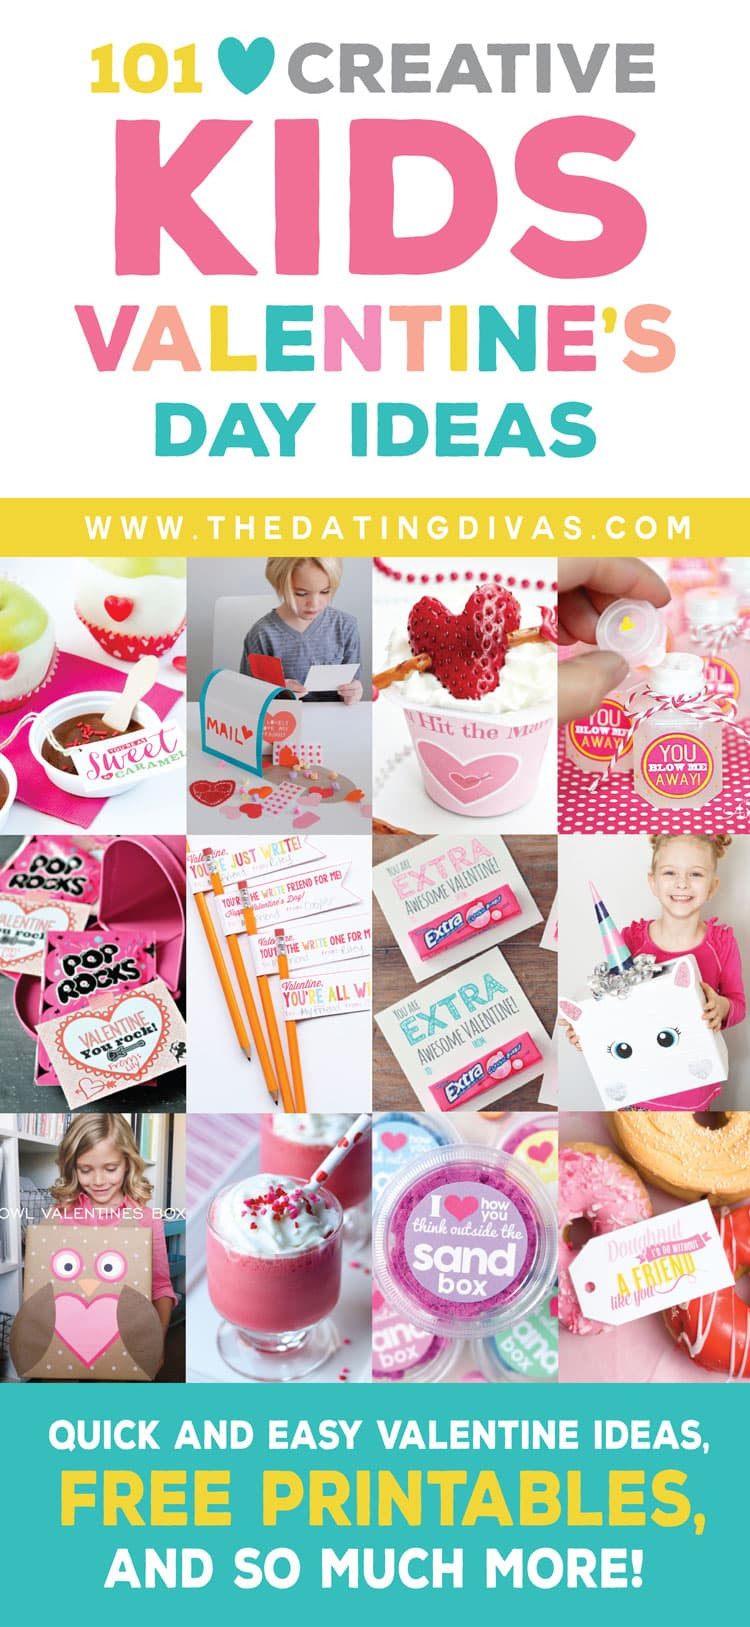 Ideas For Valentines Day
 Kids Valentine s Day Ideas From The Dating Divas